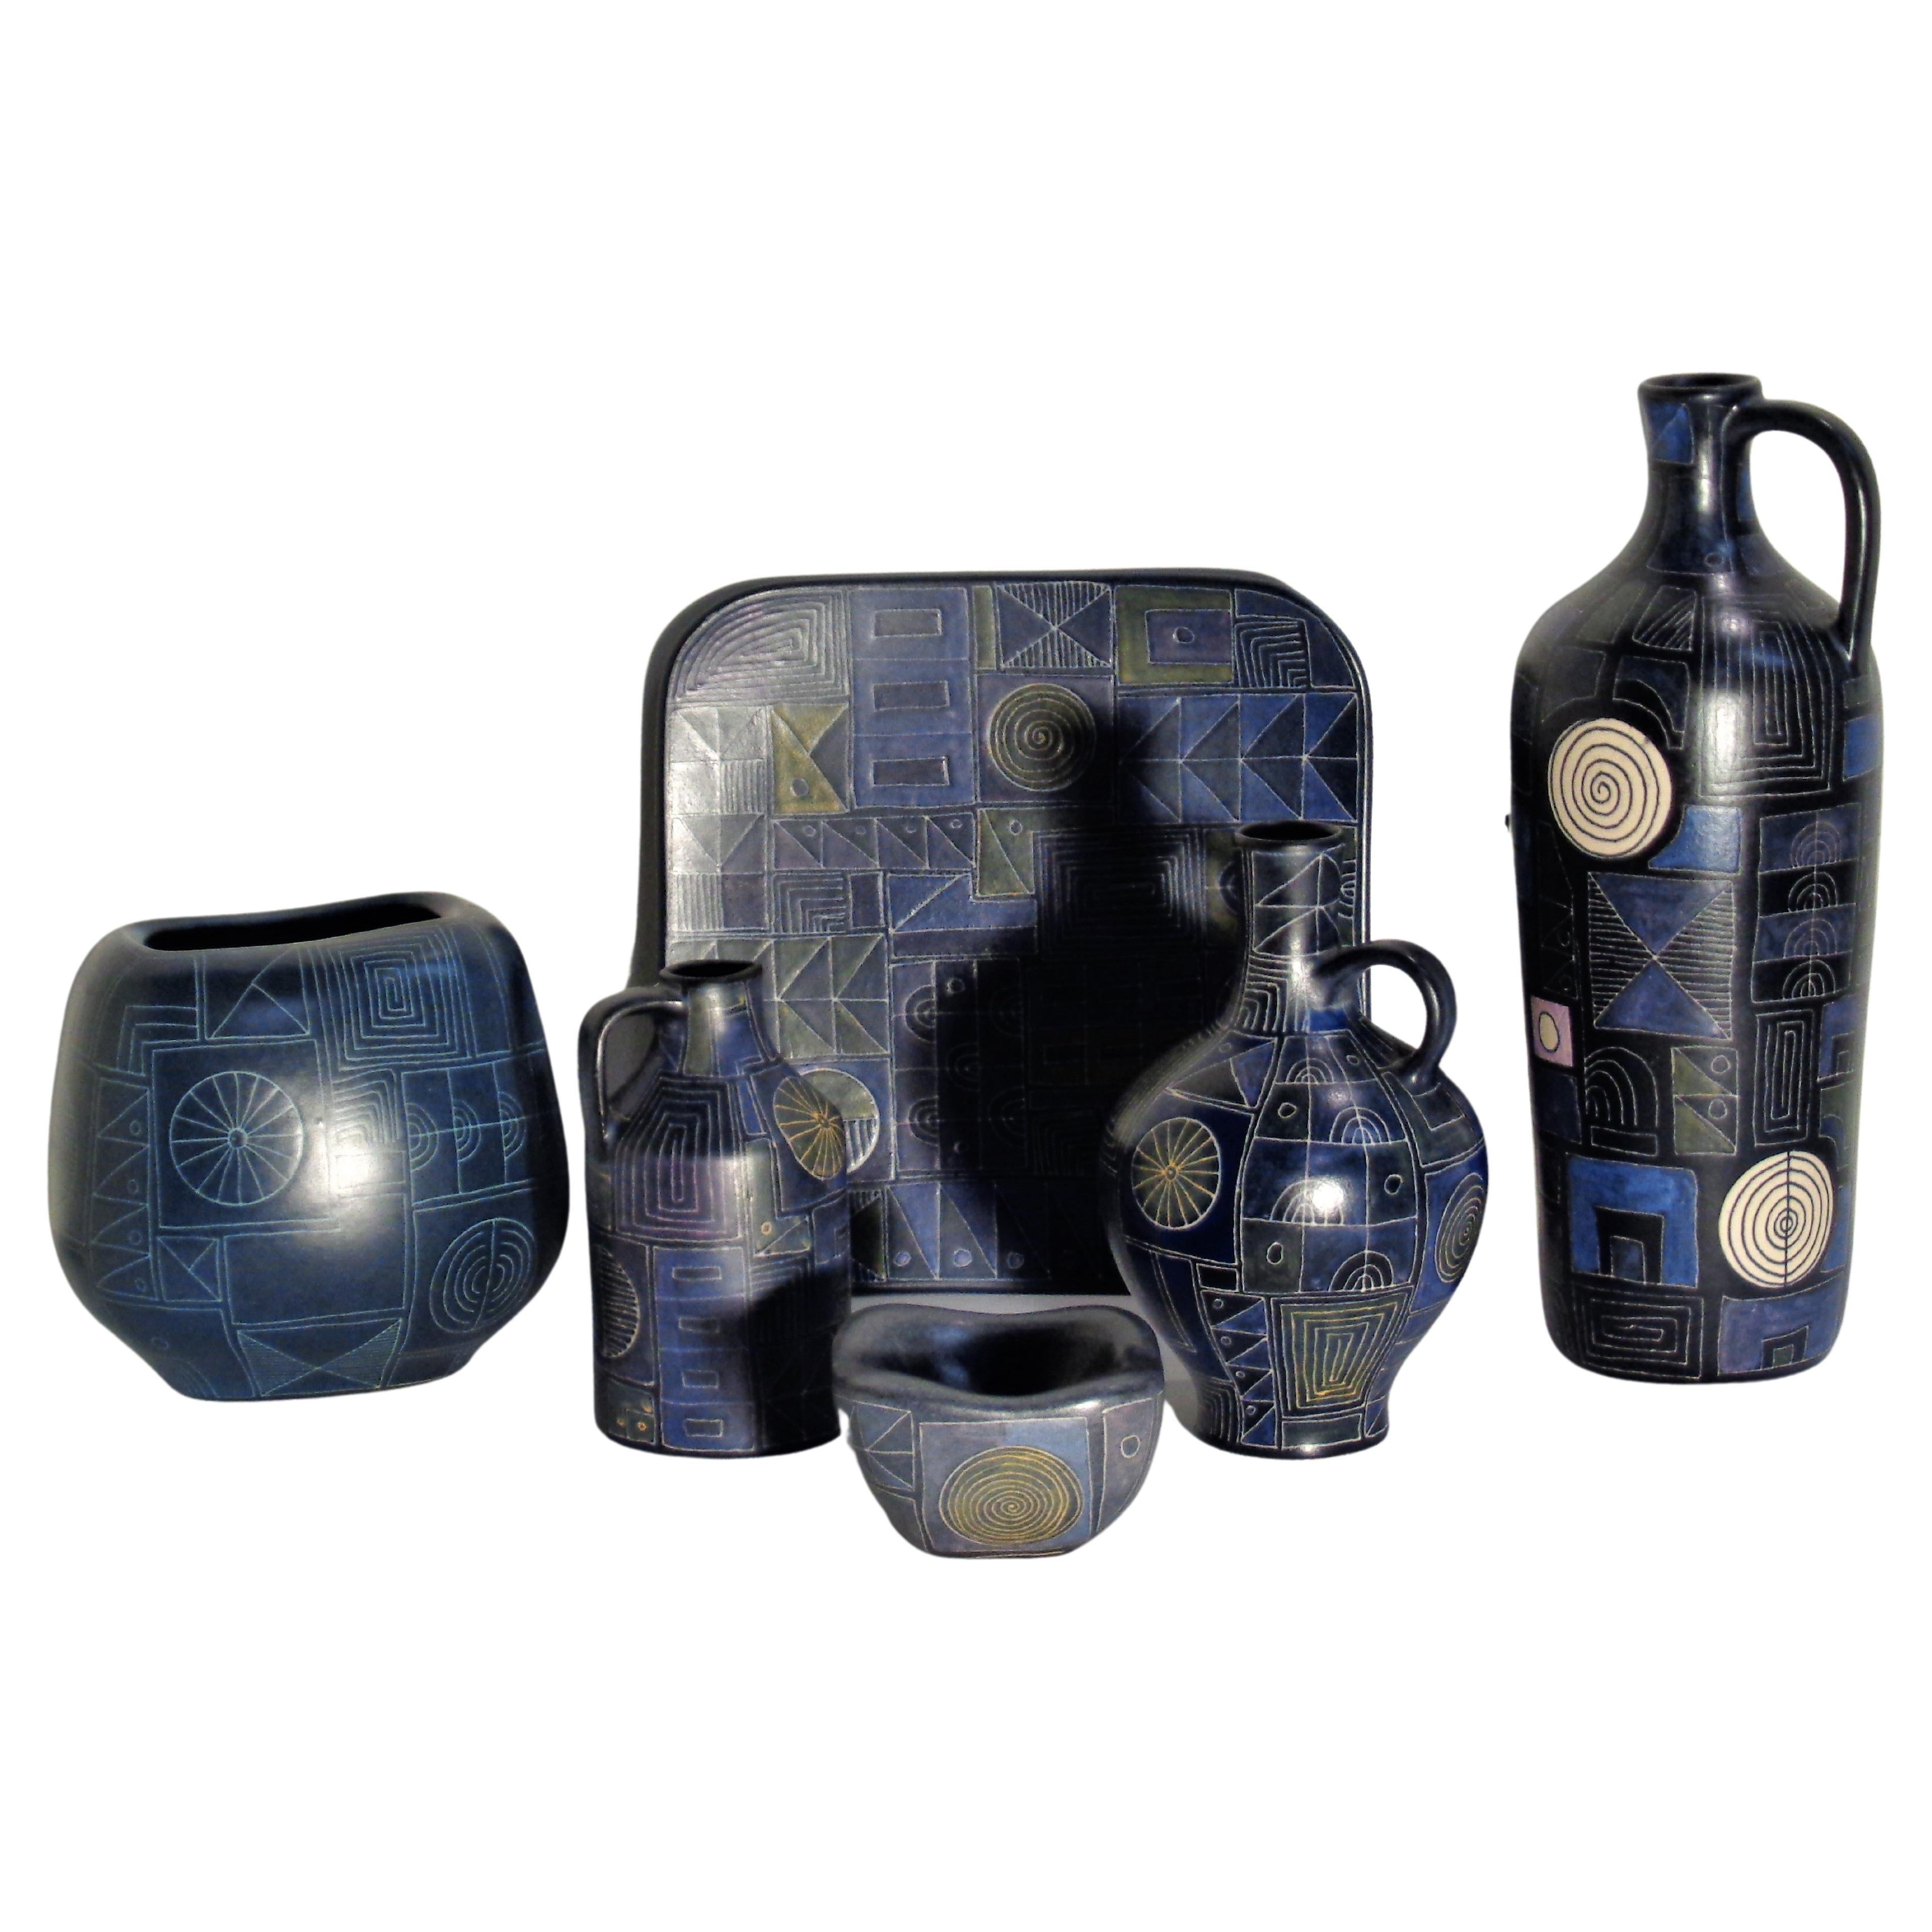  Lu Klopfer Geometric Sgrafitto Pottery Collection, Germany 1950's